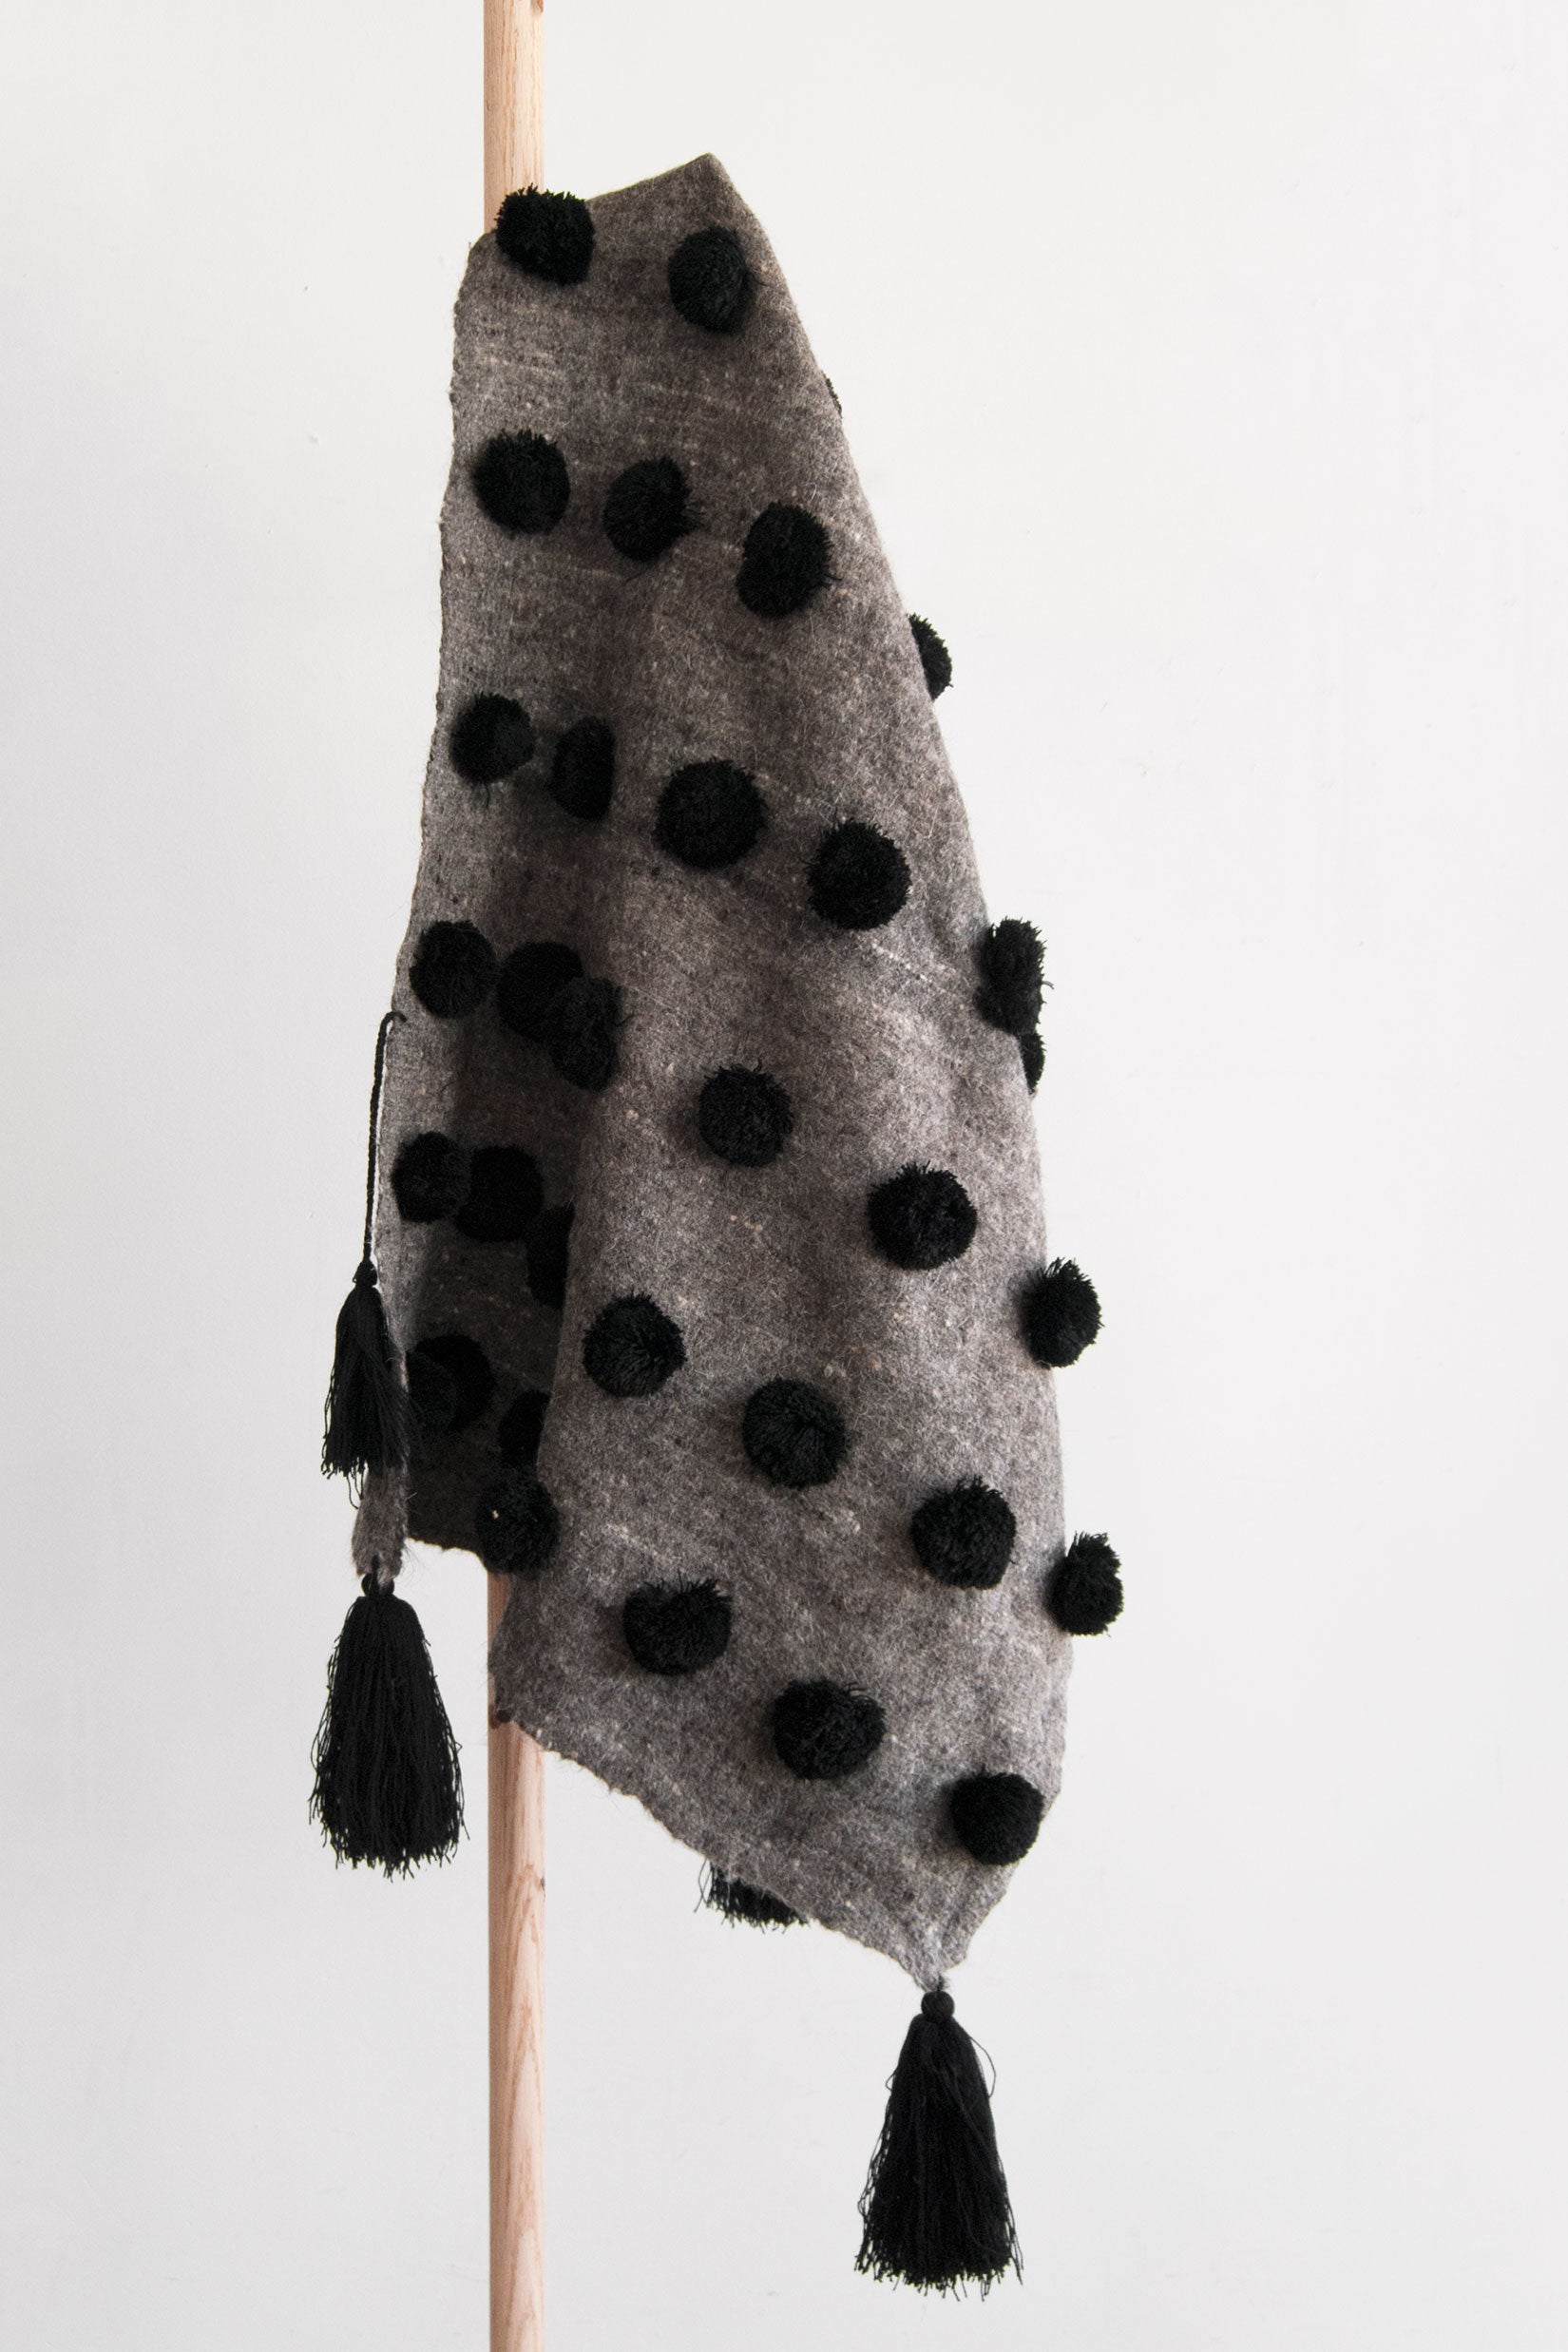 Grey wool throw covered in rows of black pom poms with black tassels at each corner